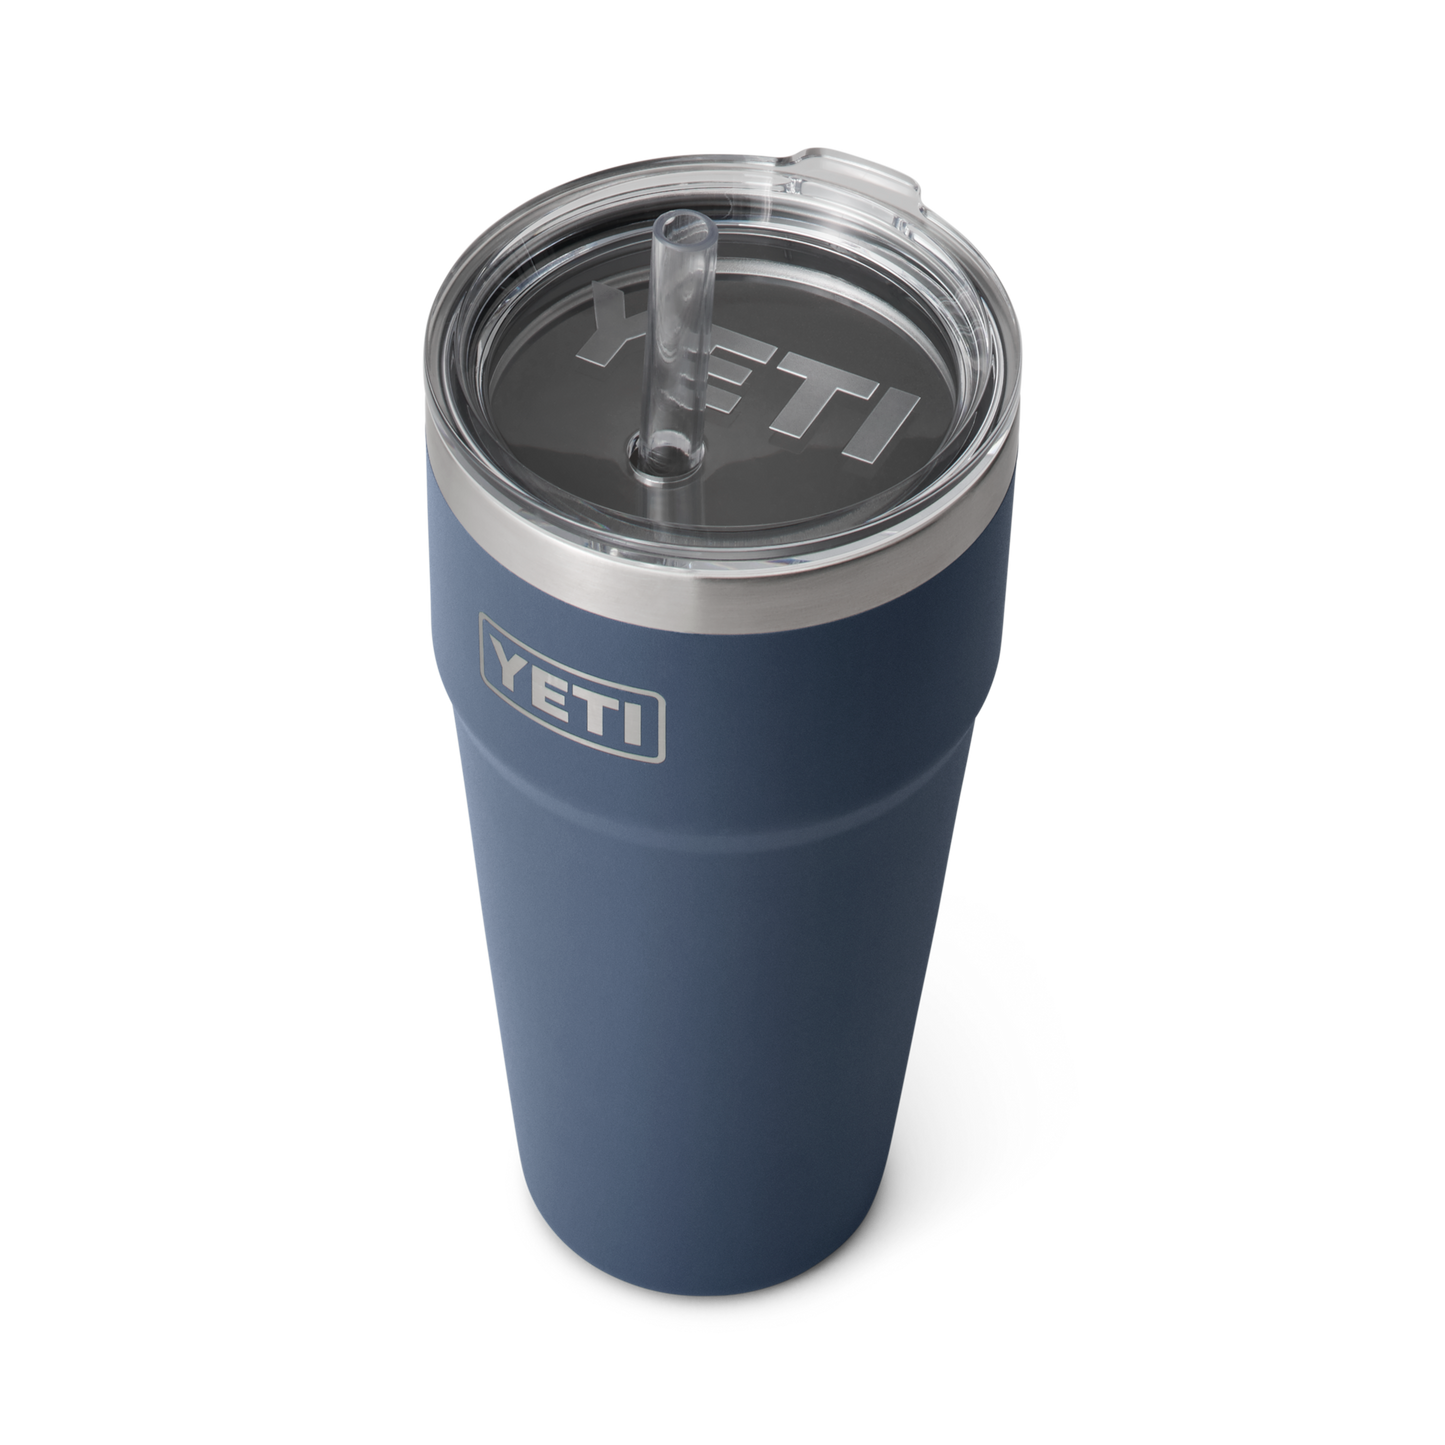 YETI Stackable Pints 26 oz with Straw Lid, Navy